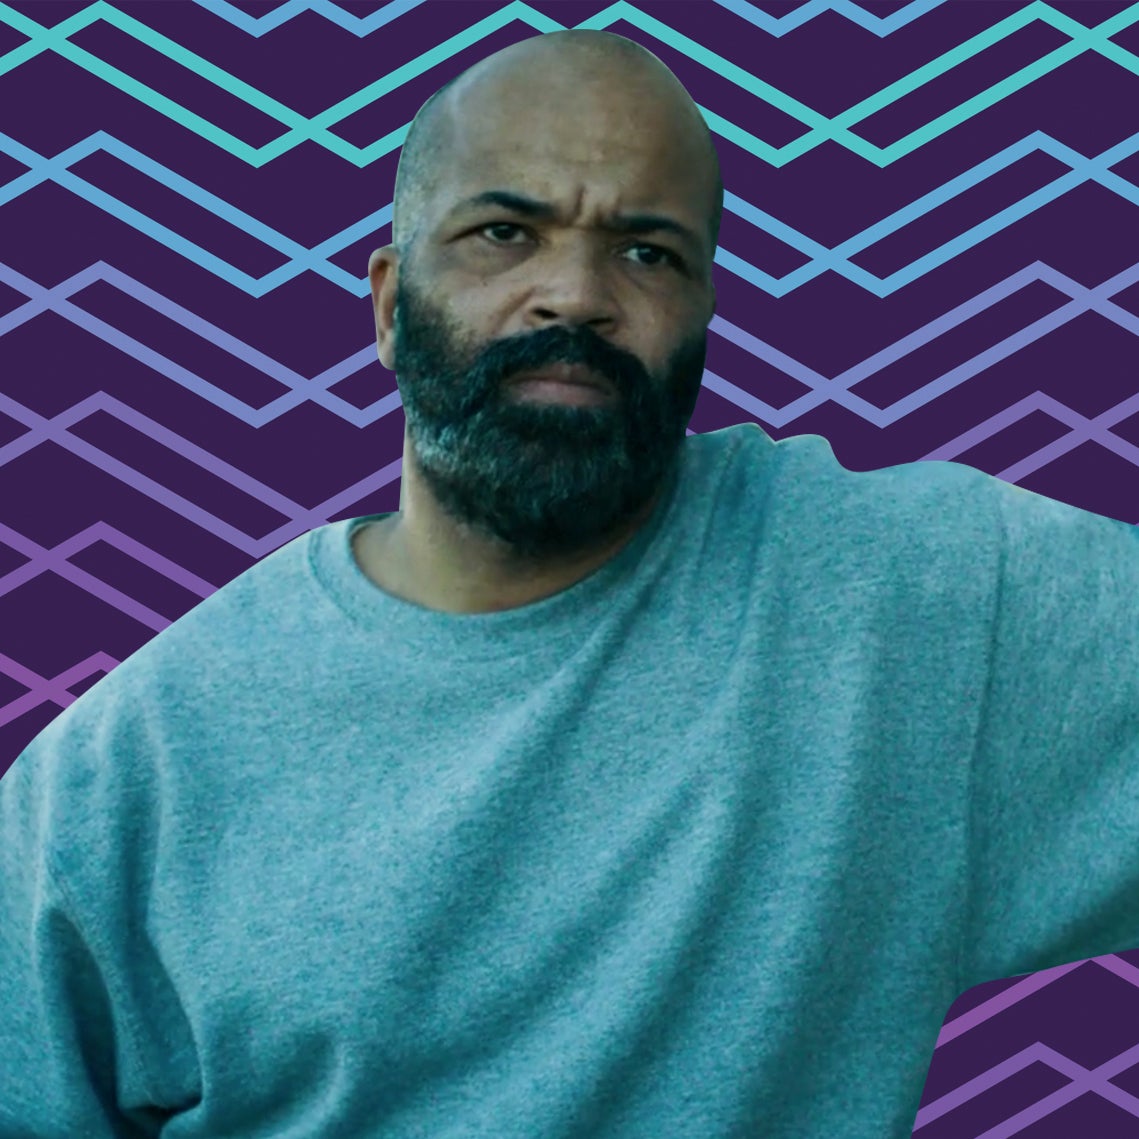 Jeffrey's Wright's Latest Film, 'O.G.', Shows The Lasting Effects Of Crime And A Flawed System
